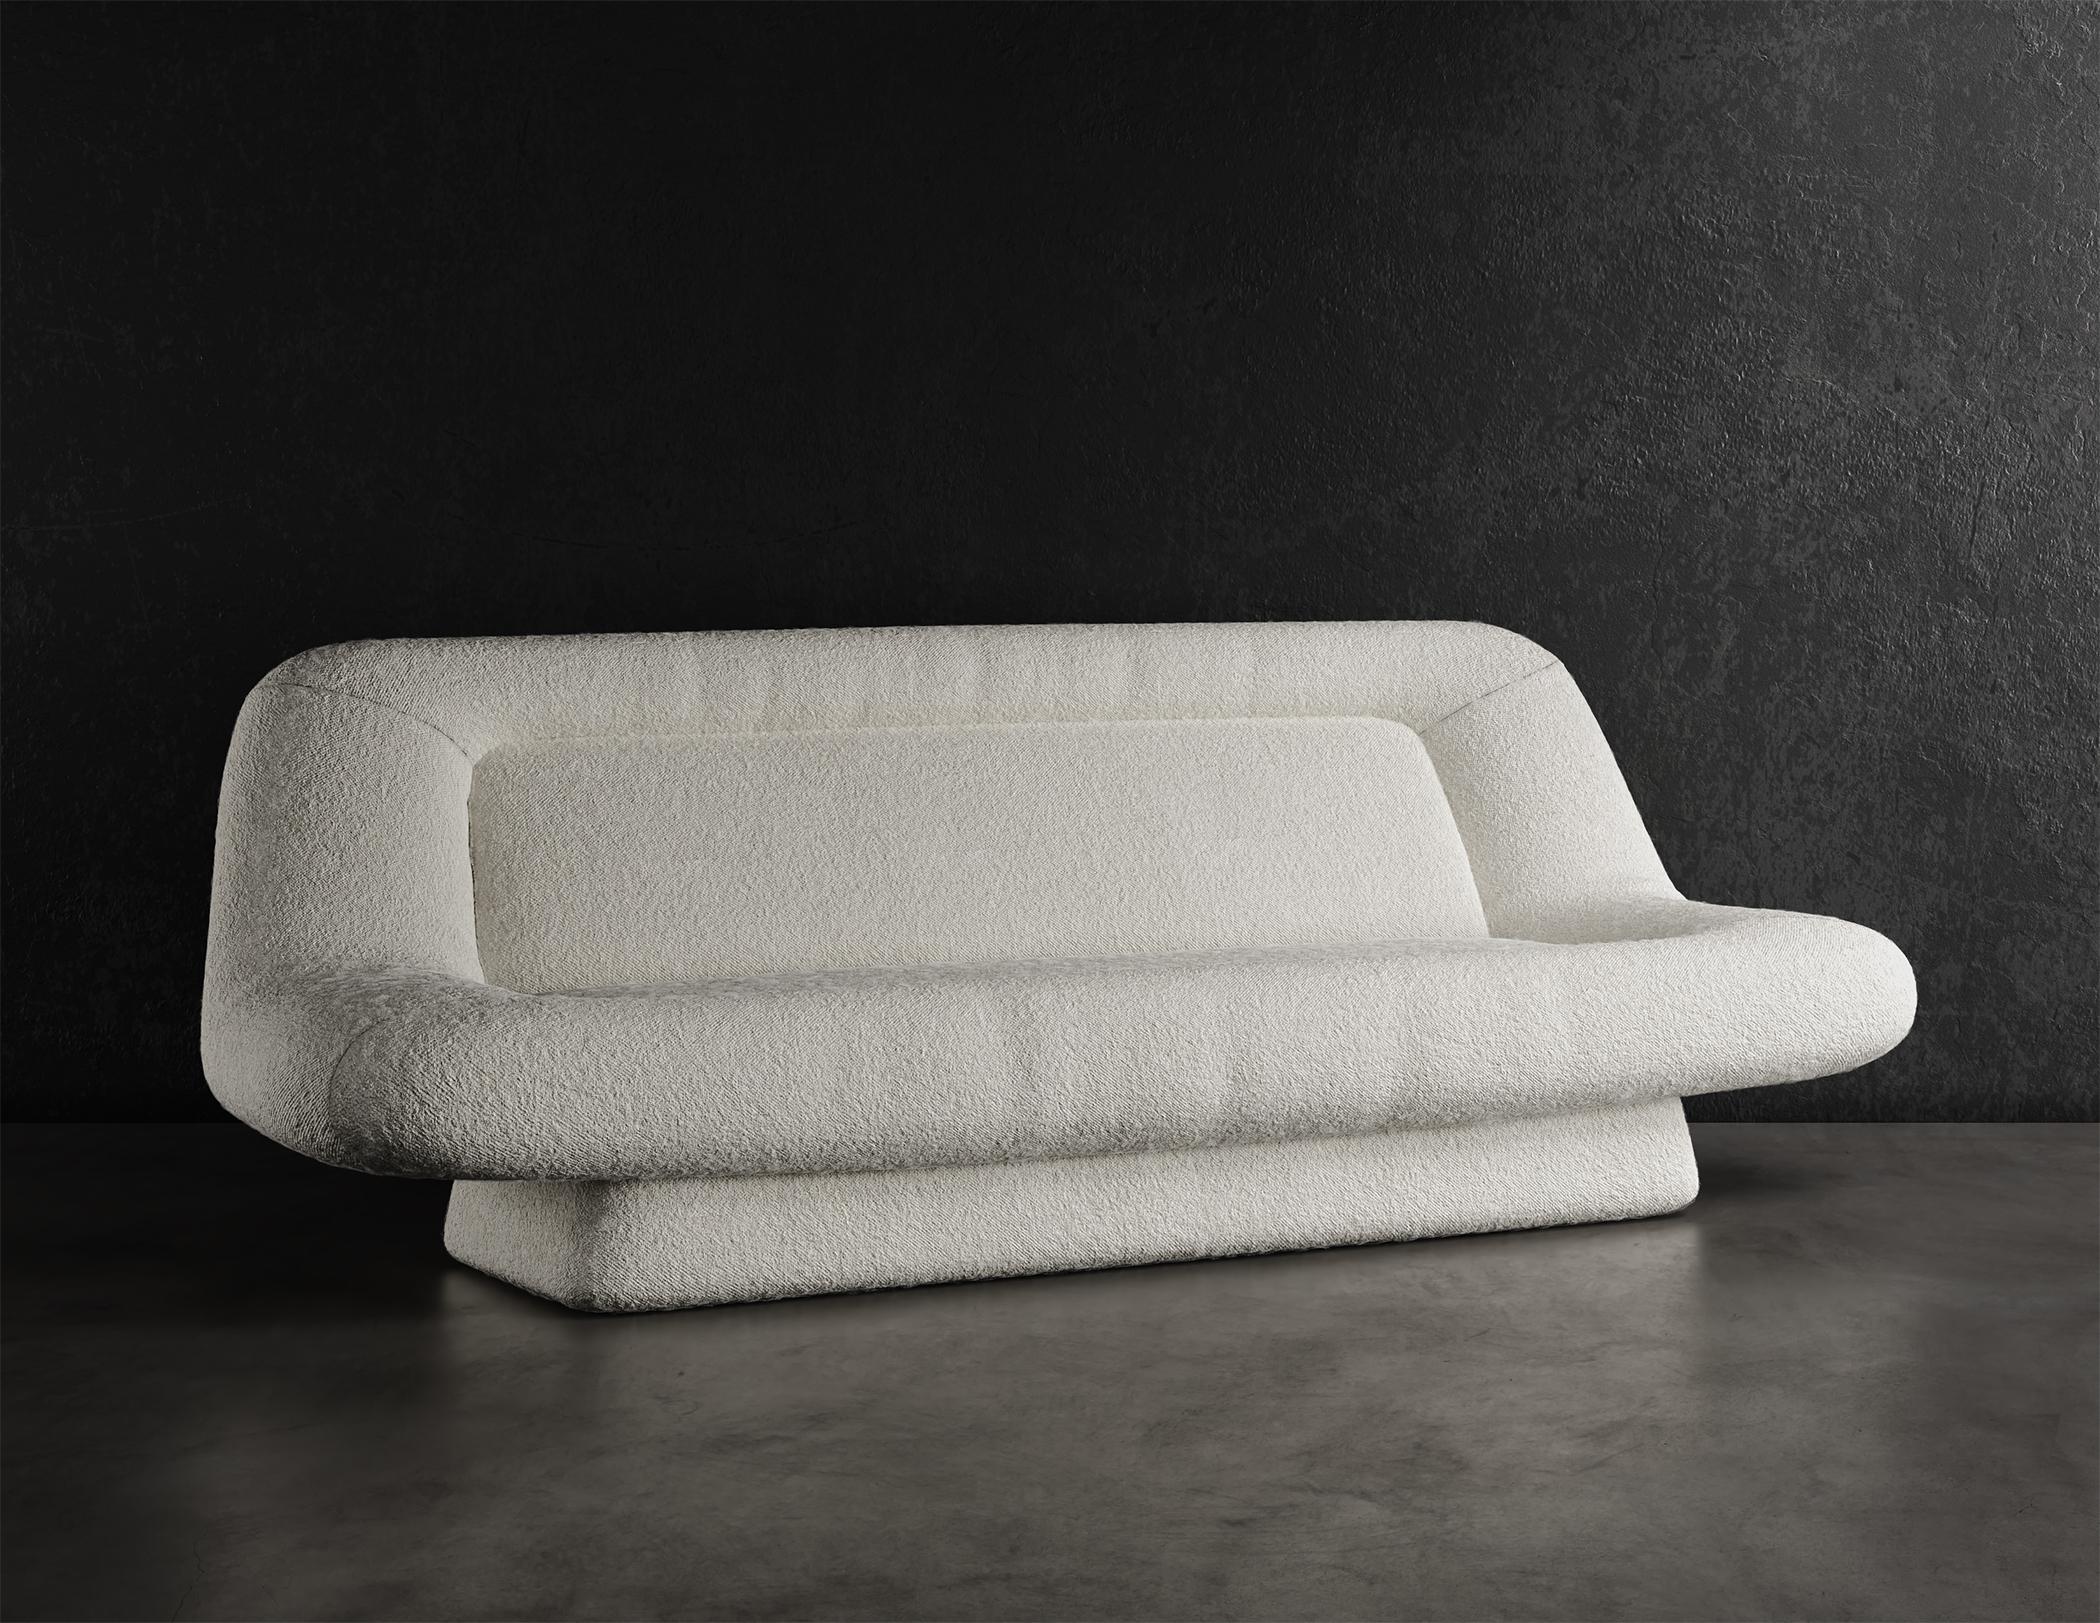 WAVE SOFA - Modern Design in Cloud Boucle in Warm White

The Wave Sofa is a modern and stylish piece of furniture that will add a touch of elegance to any room. It is upholstered in a luxurious cloud boucle fabric in warm white, which not only looks